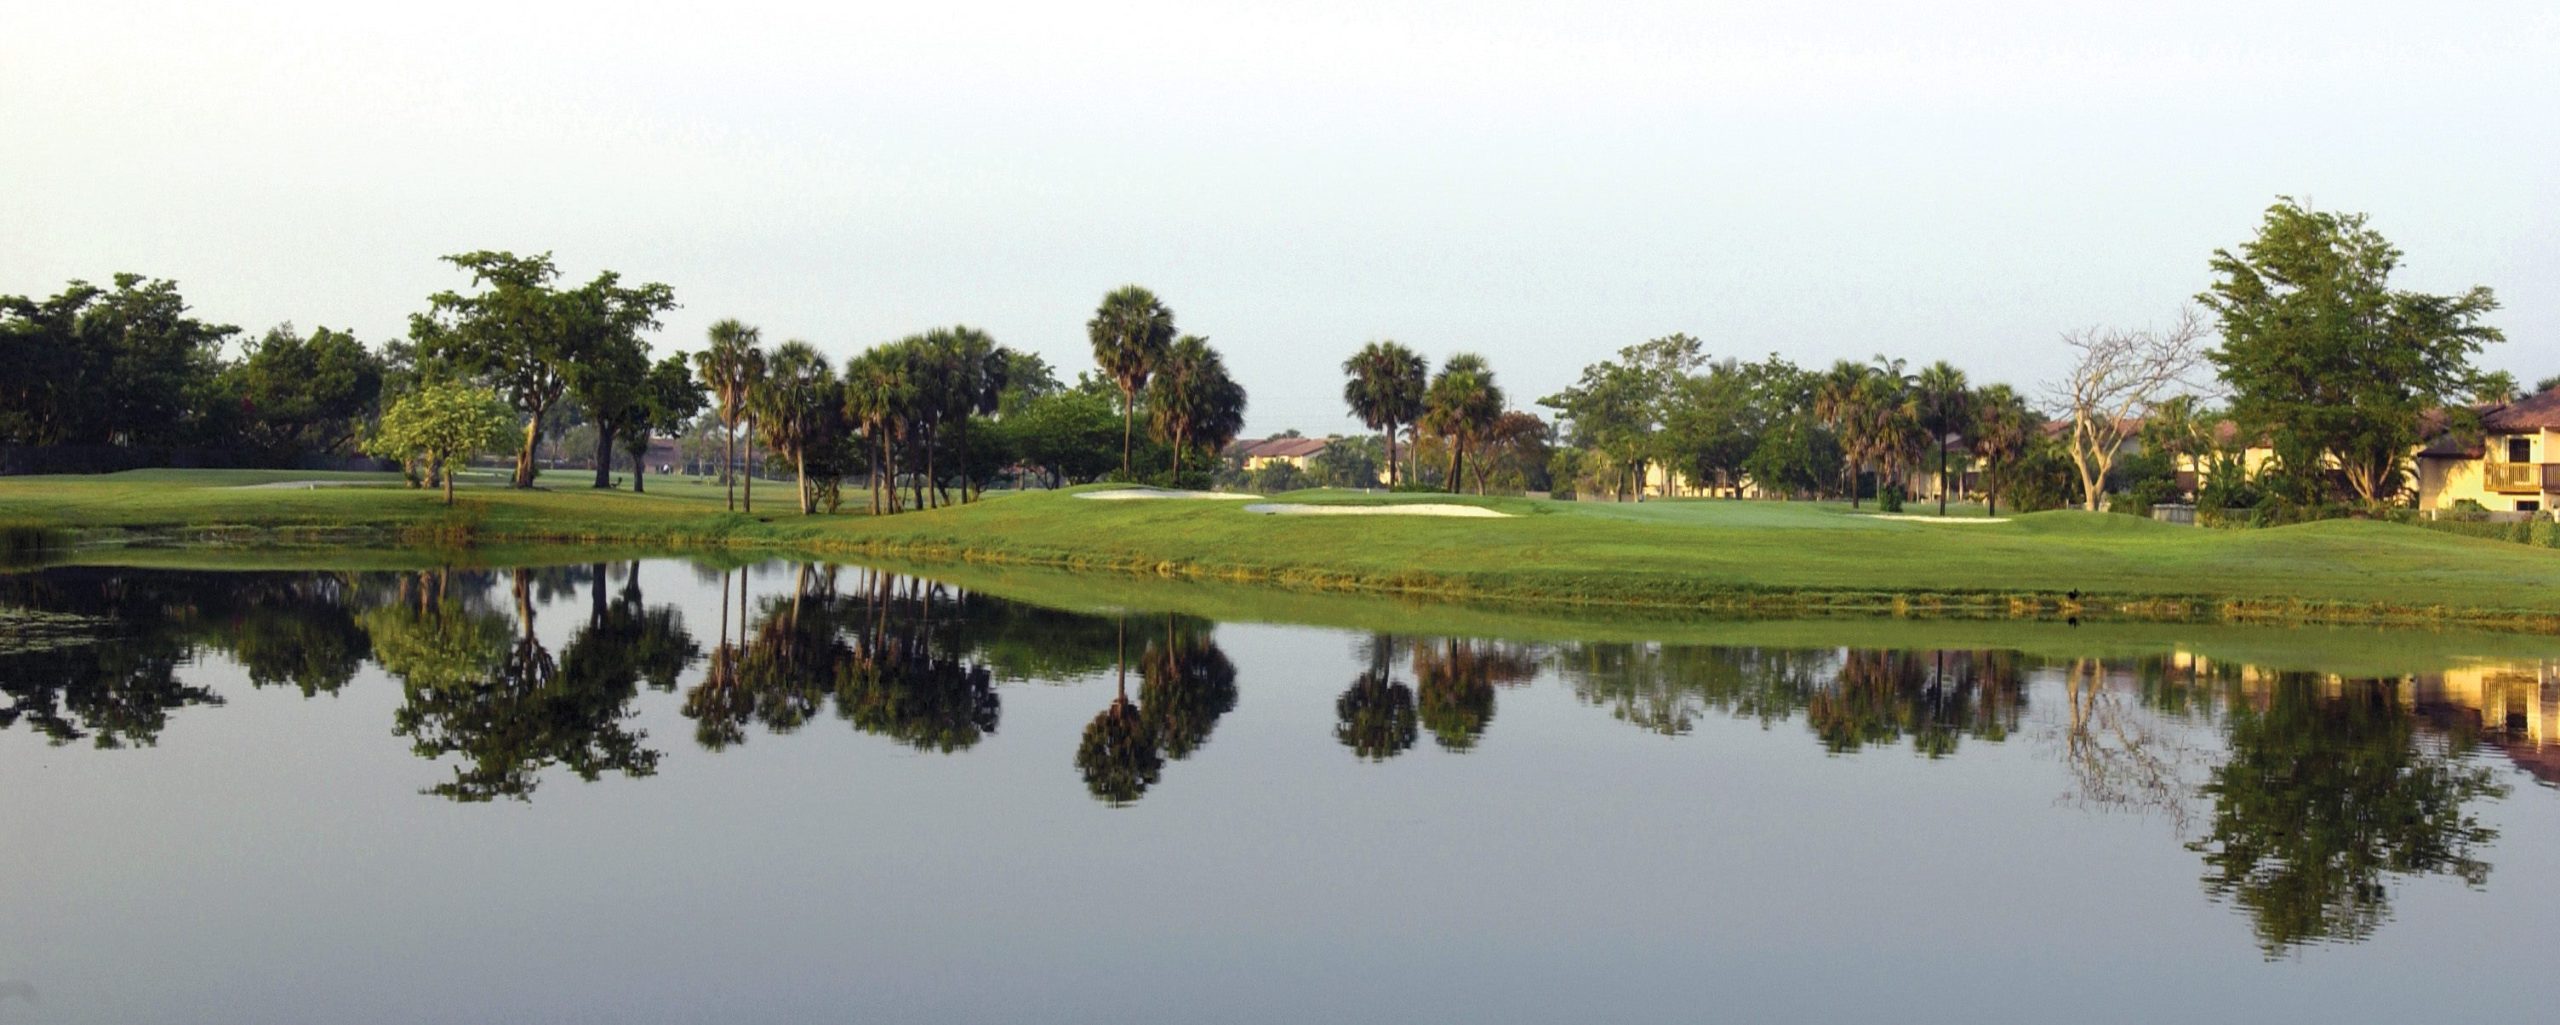 The golf course features a lake and numerous trees